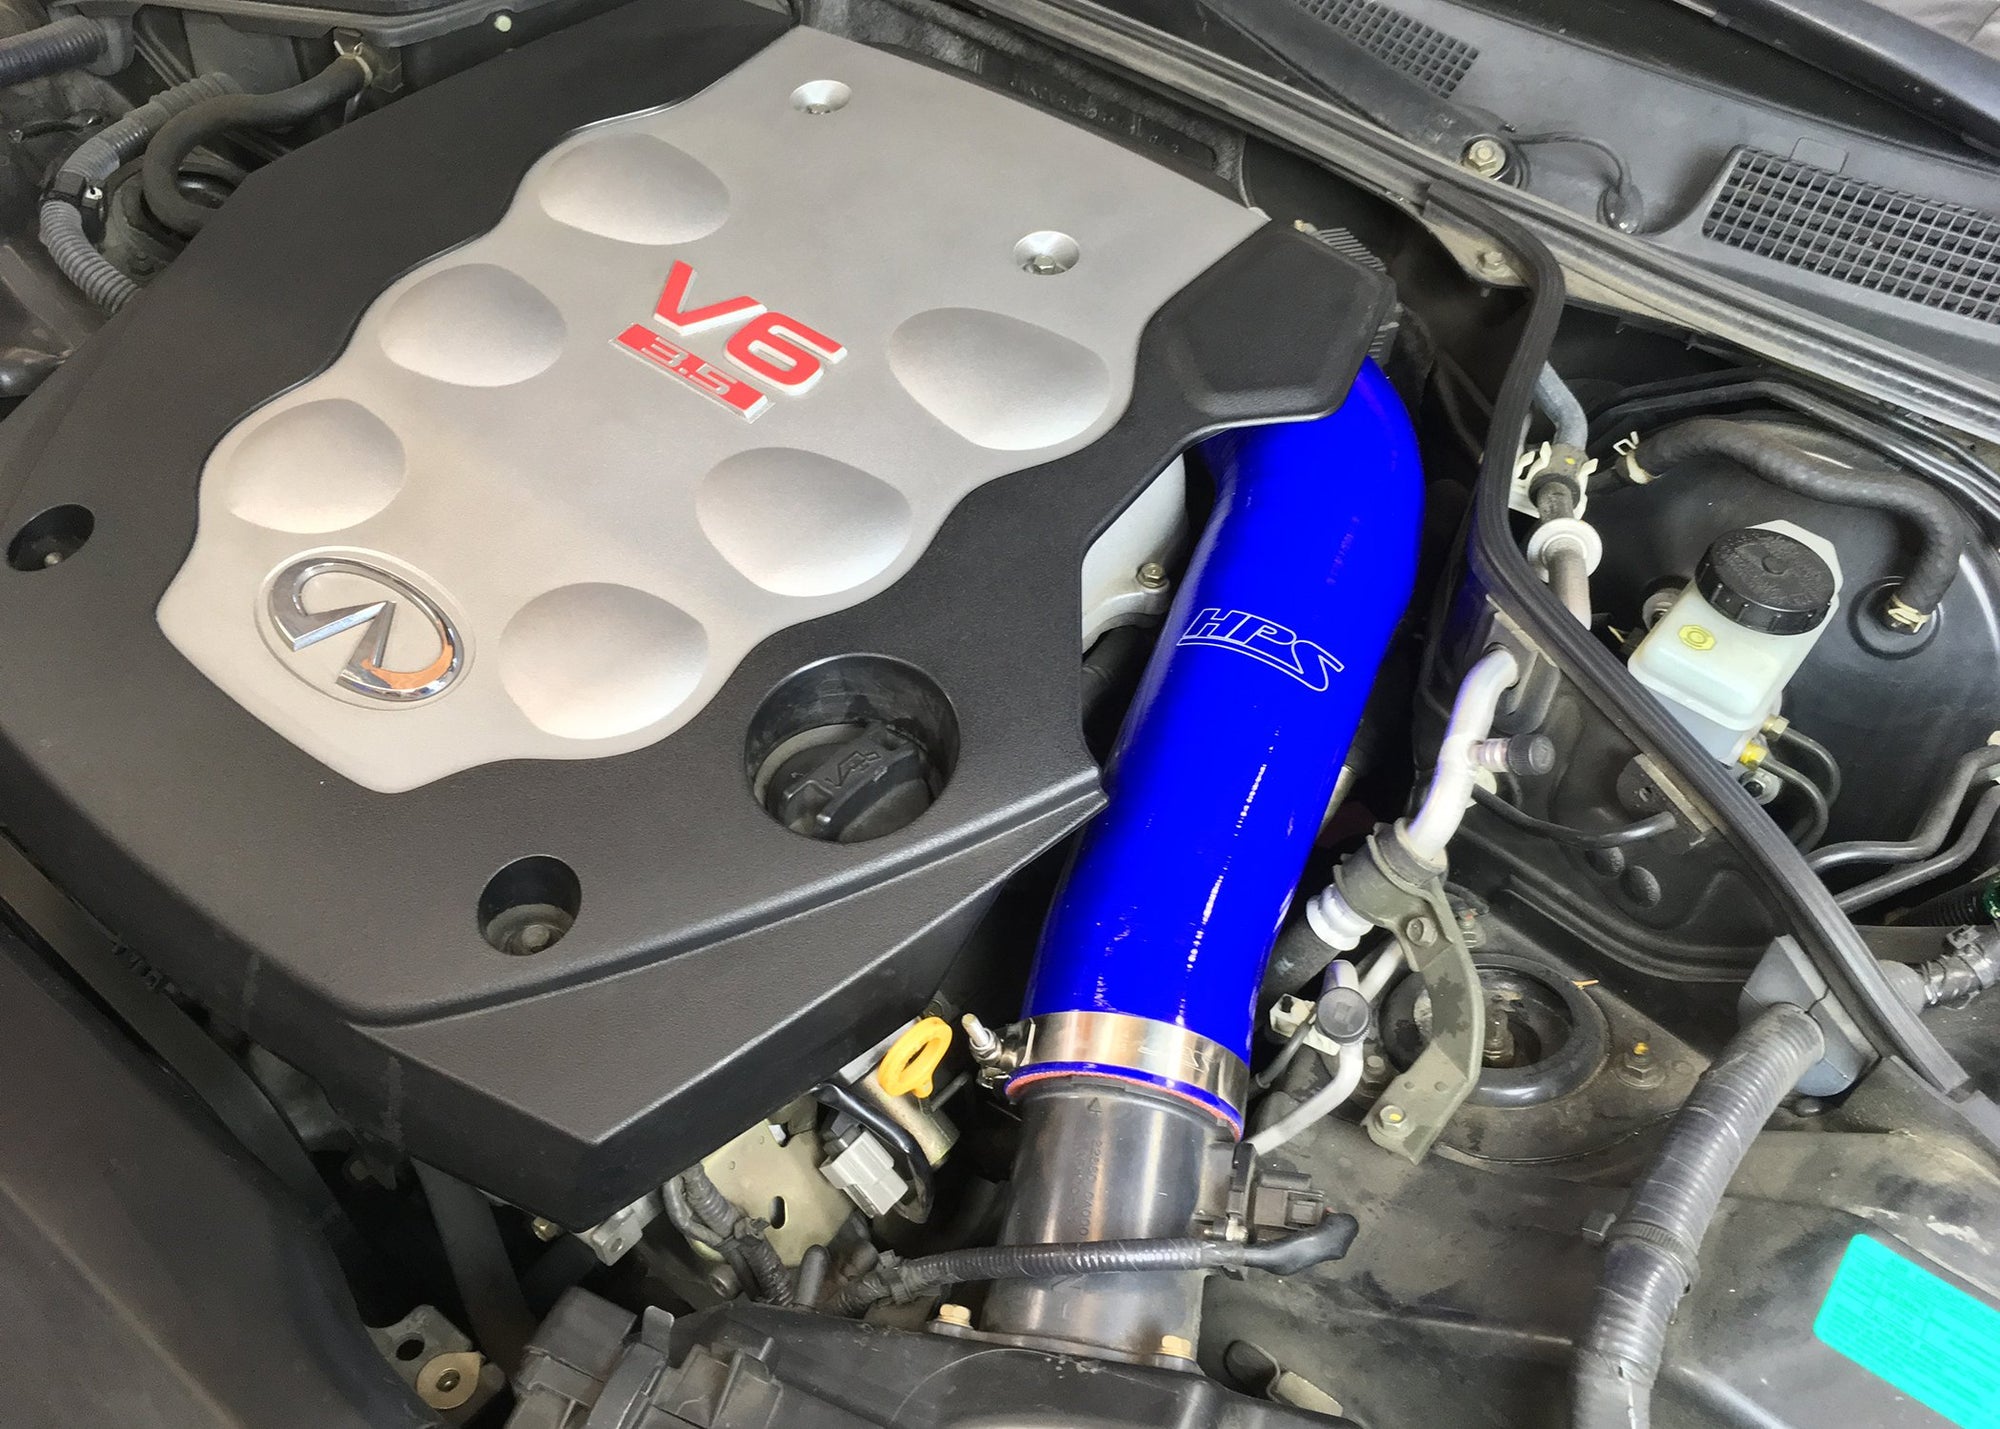 HPS Silicone Post MAF Air Intake Kit 57-1592 installed on Infiniti 03-07 G35 Coupe 3.5L V6